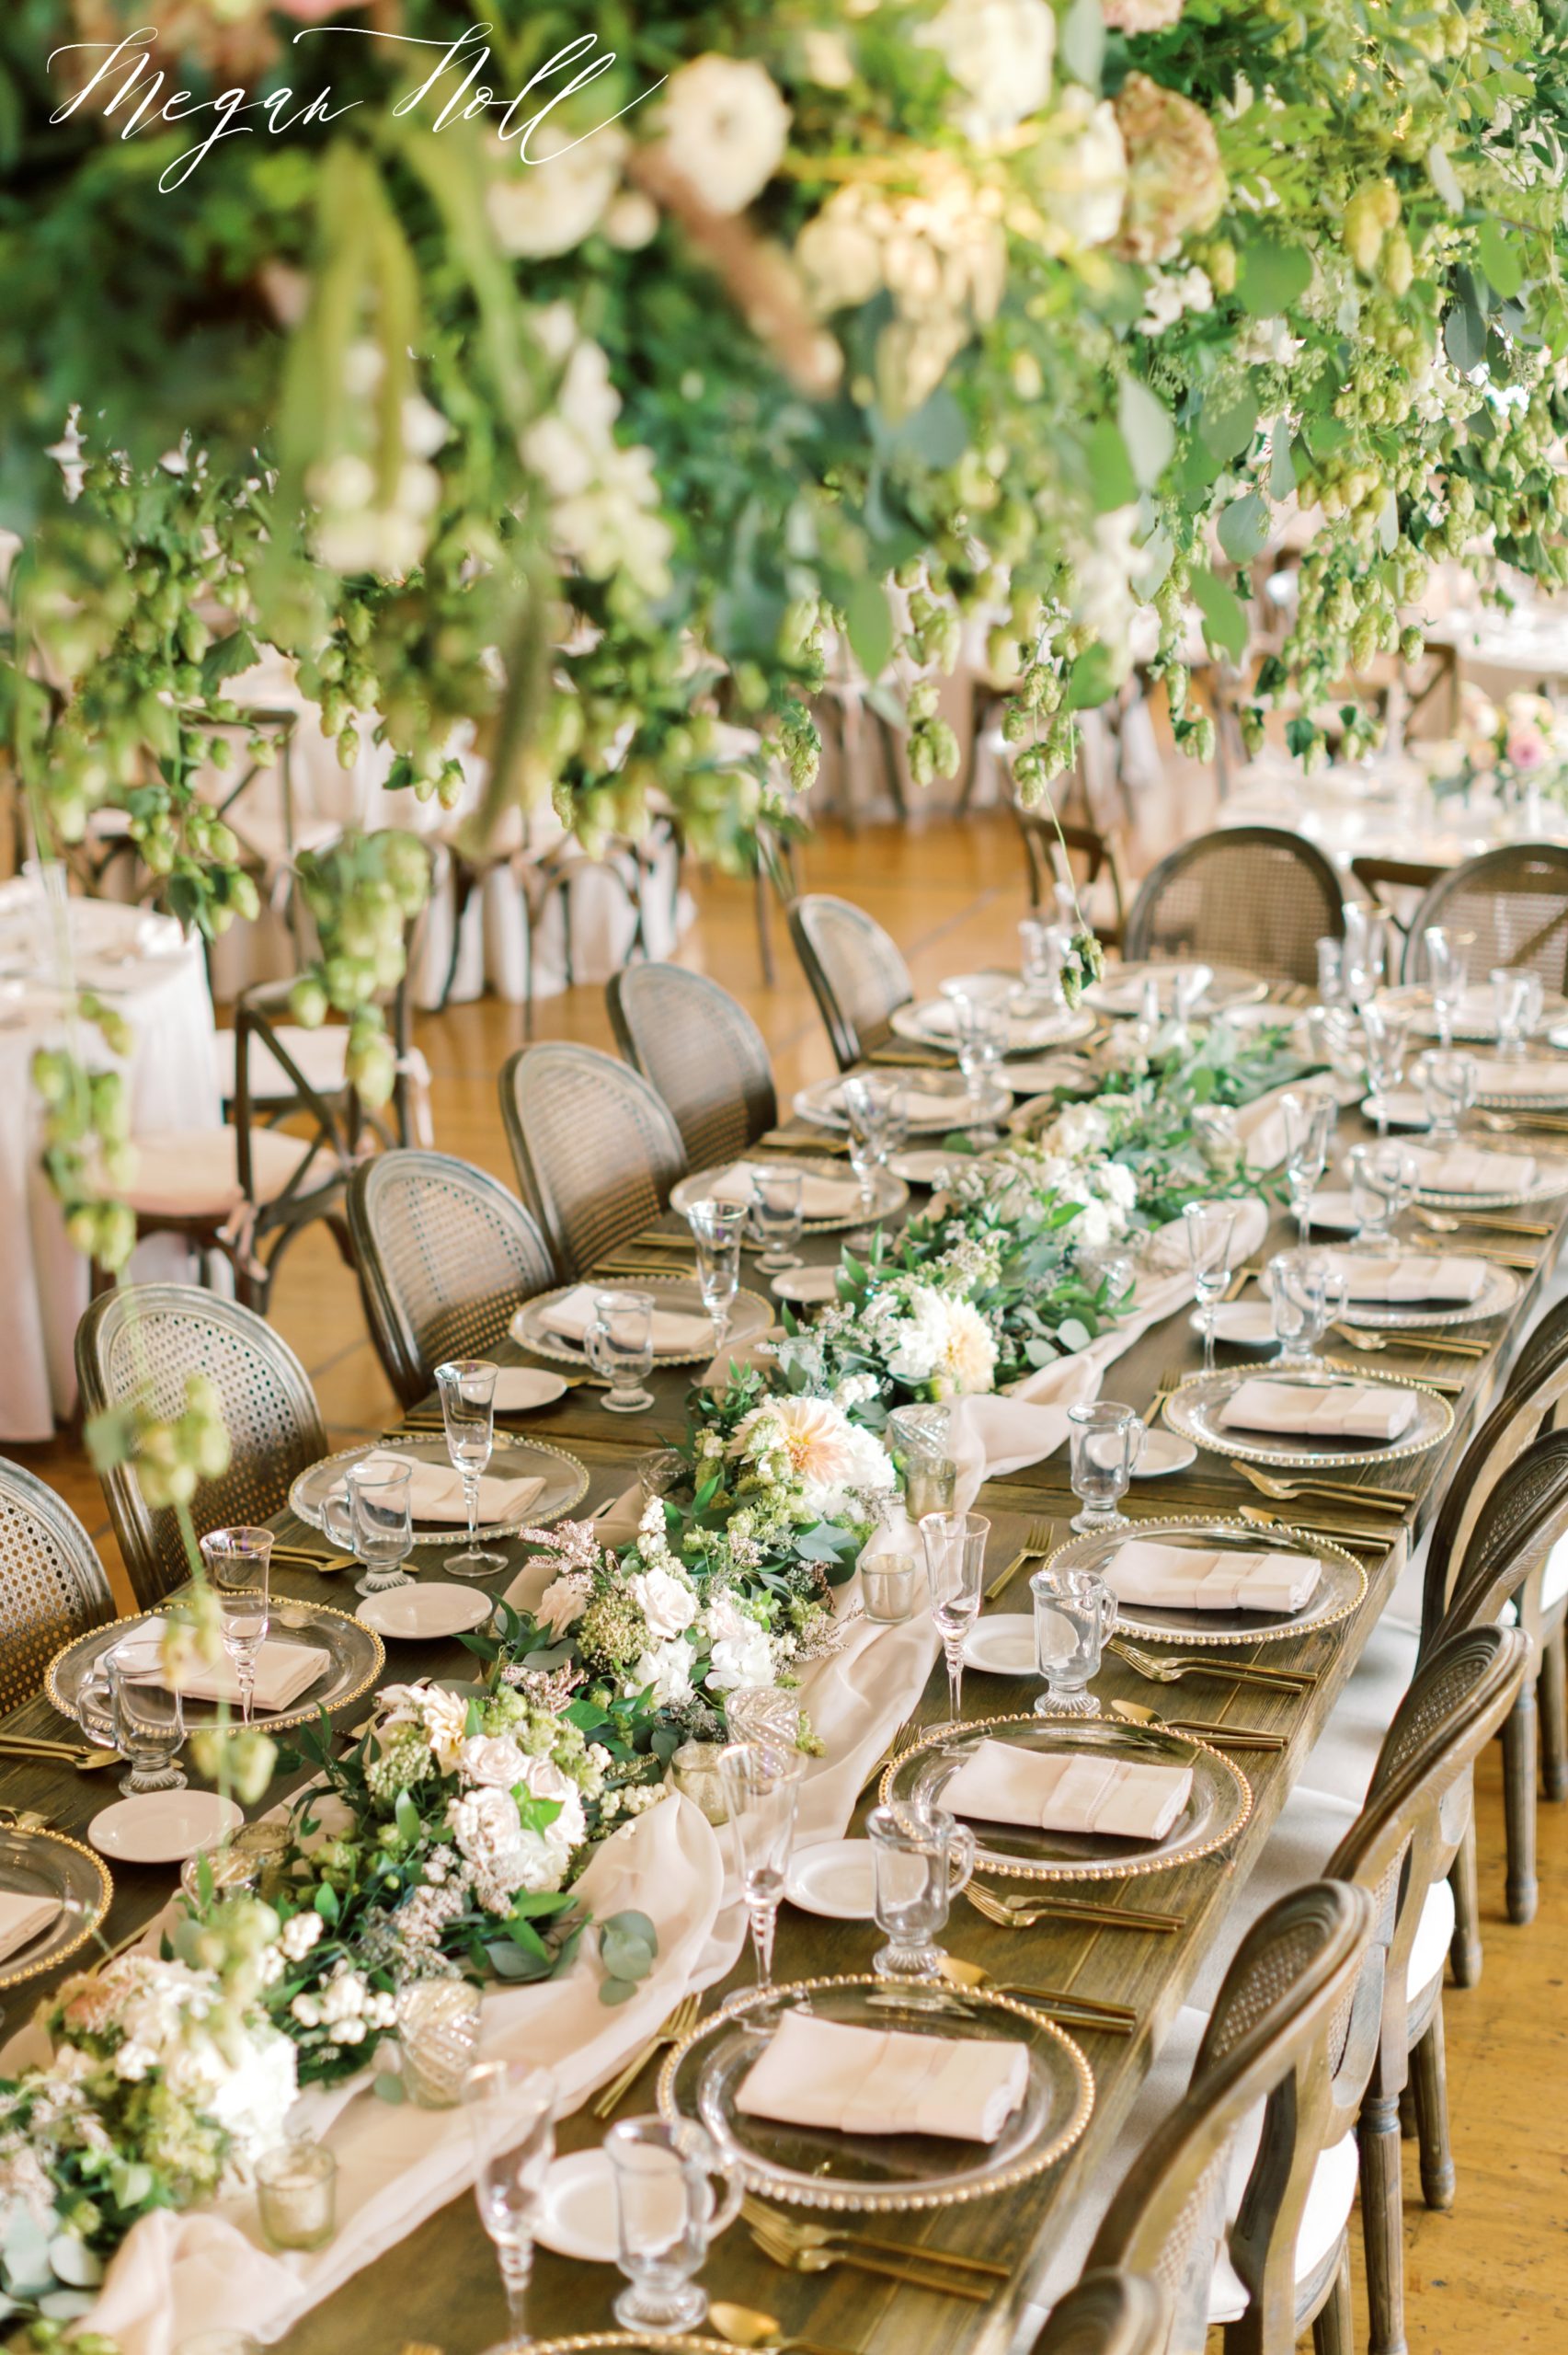 Tablescape of Pinecroft at Crosley Estate Wedding by Maura Bassman Events